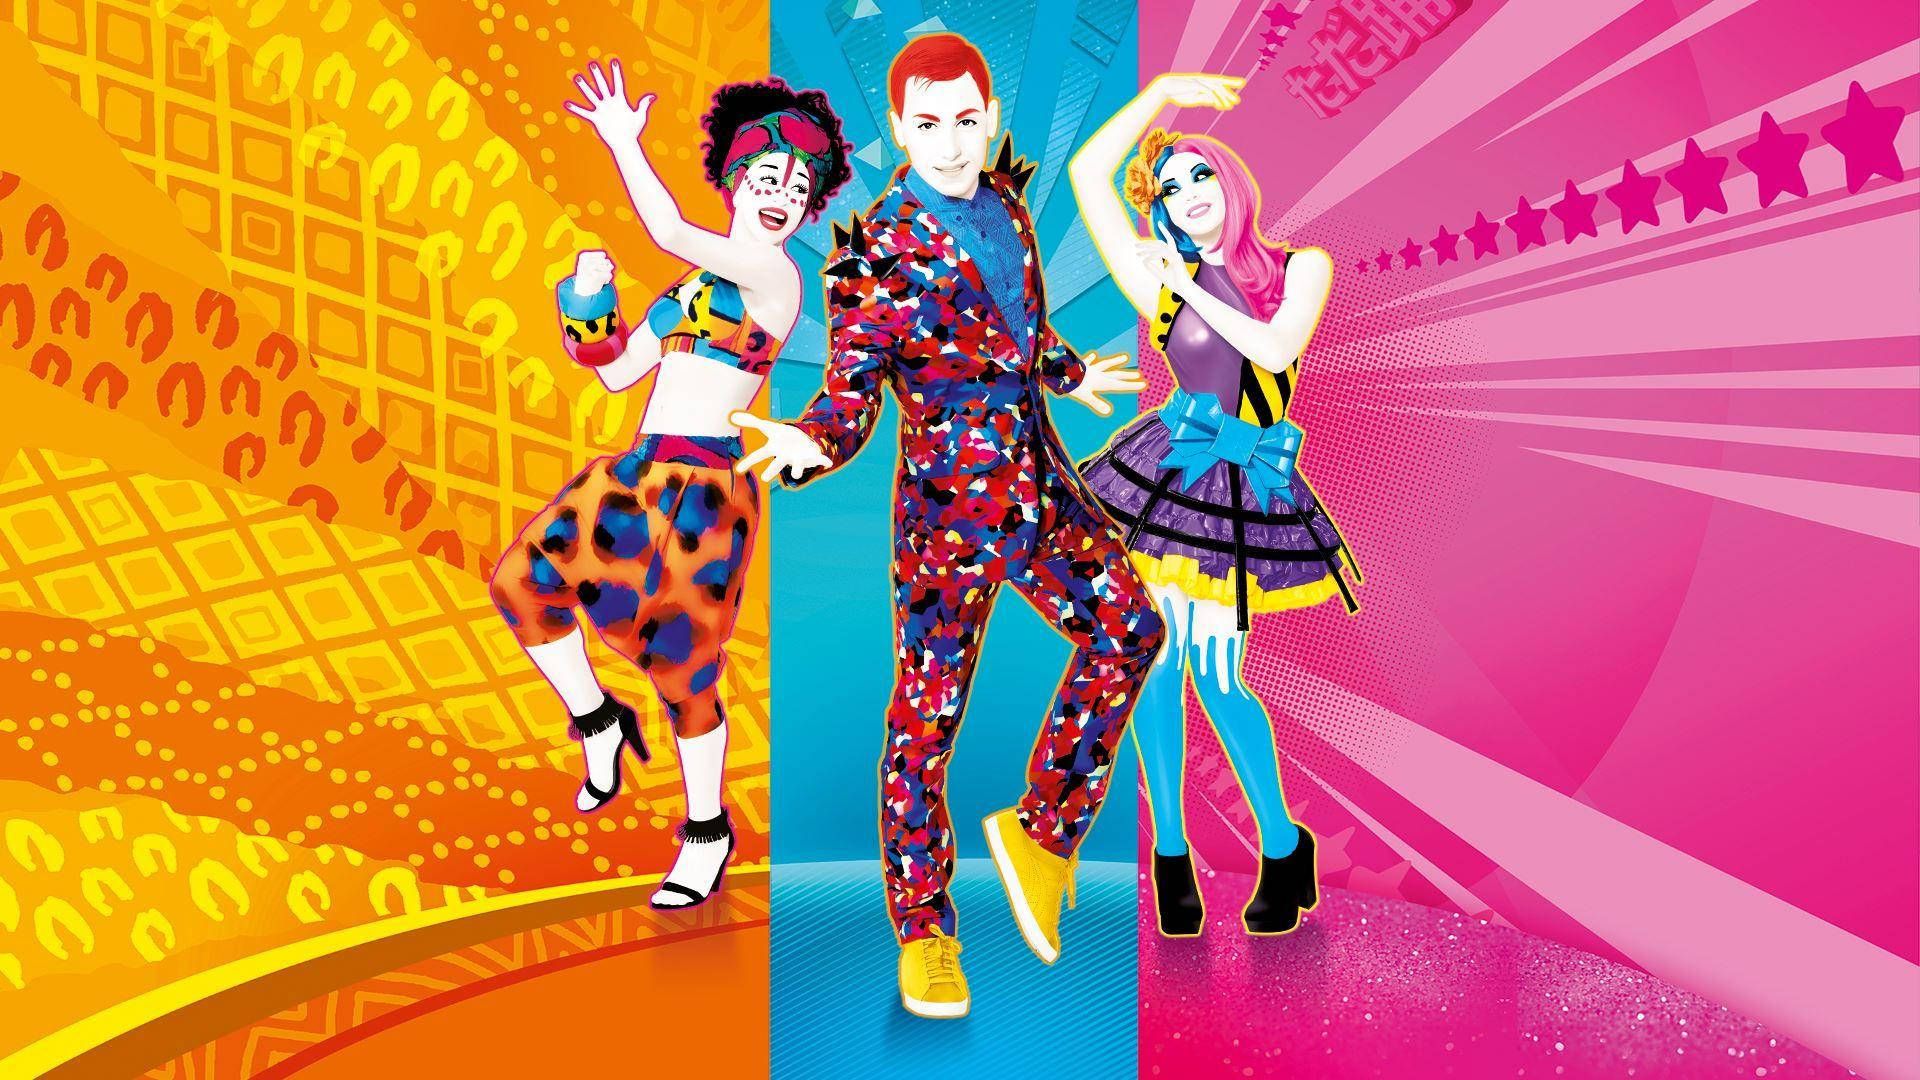 just-dance-three-dancers-with-wacky-outfits-48ukb7bjd8gkyn9o.jpg